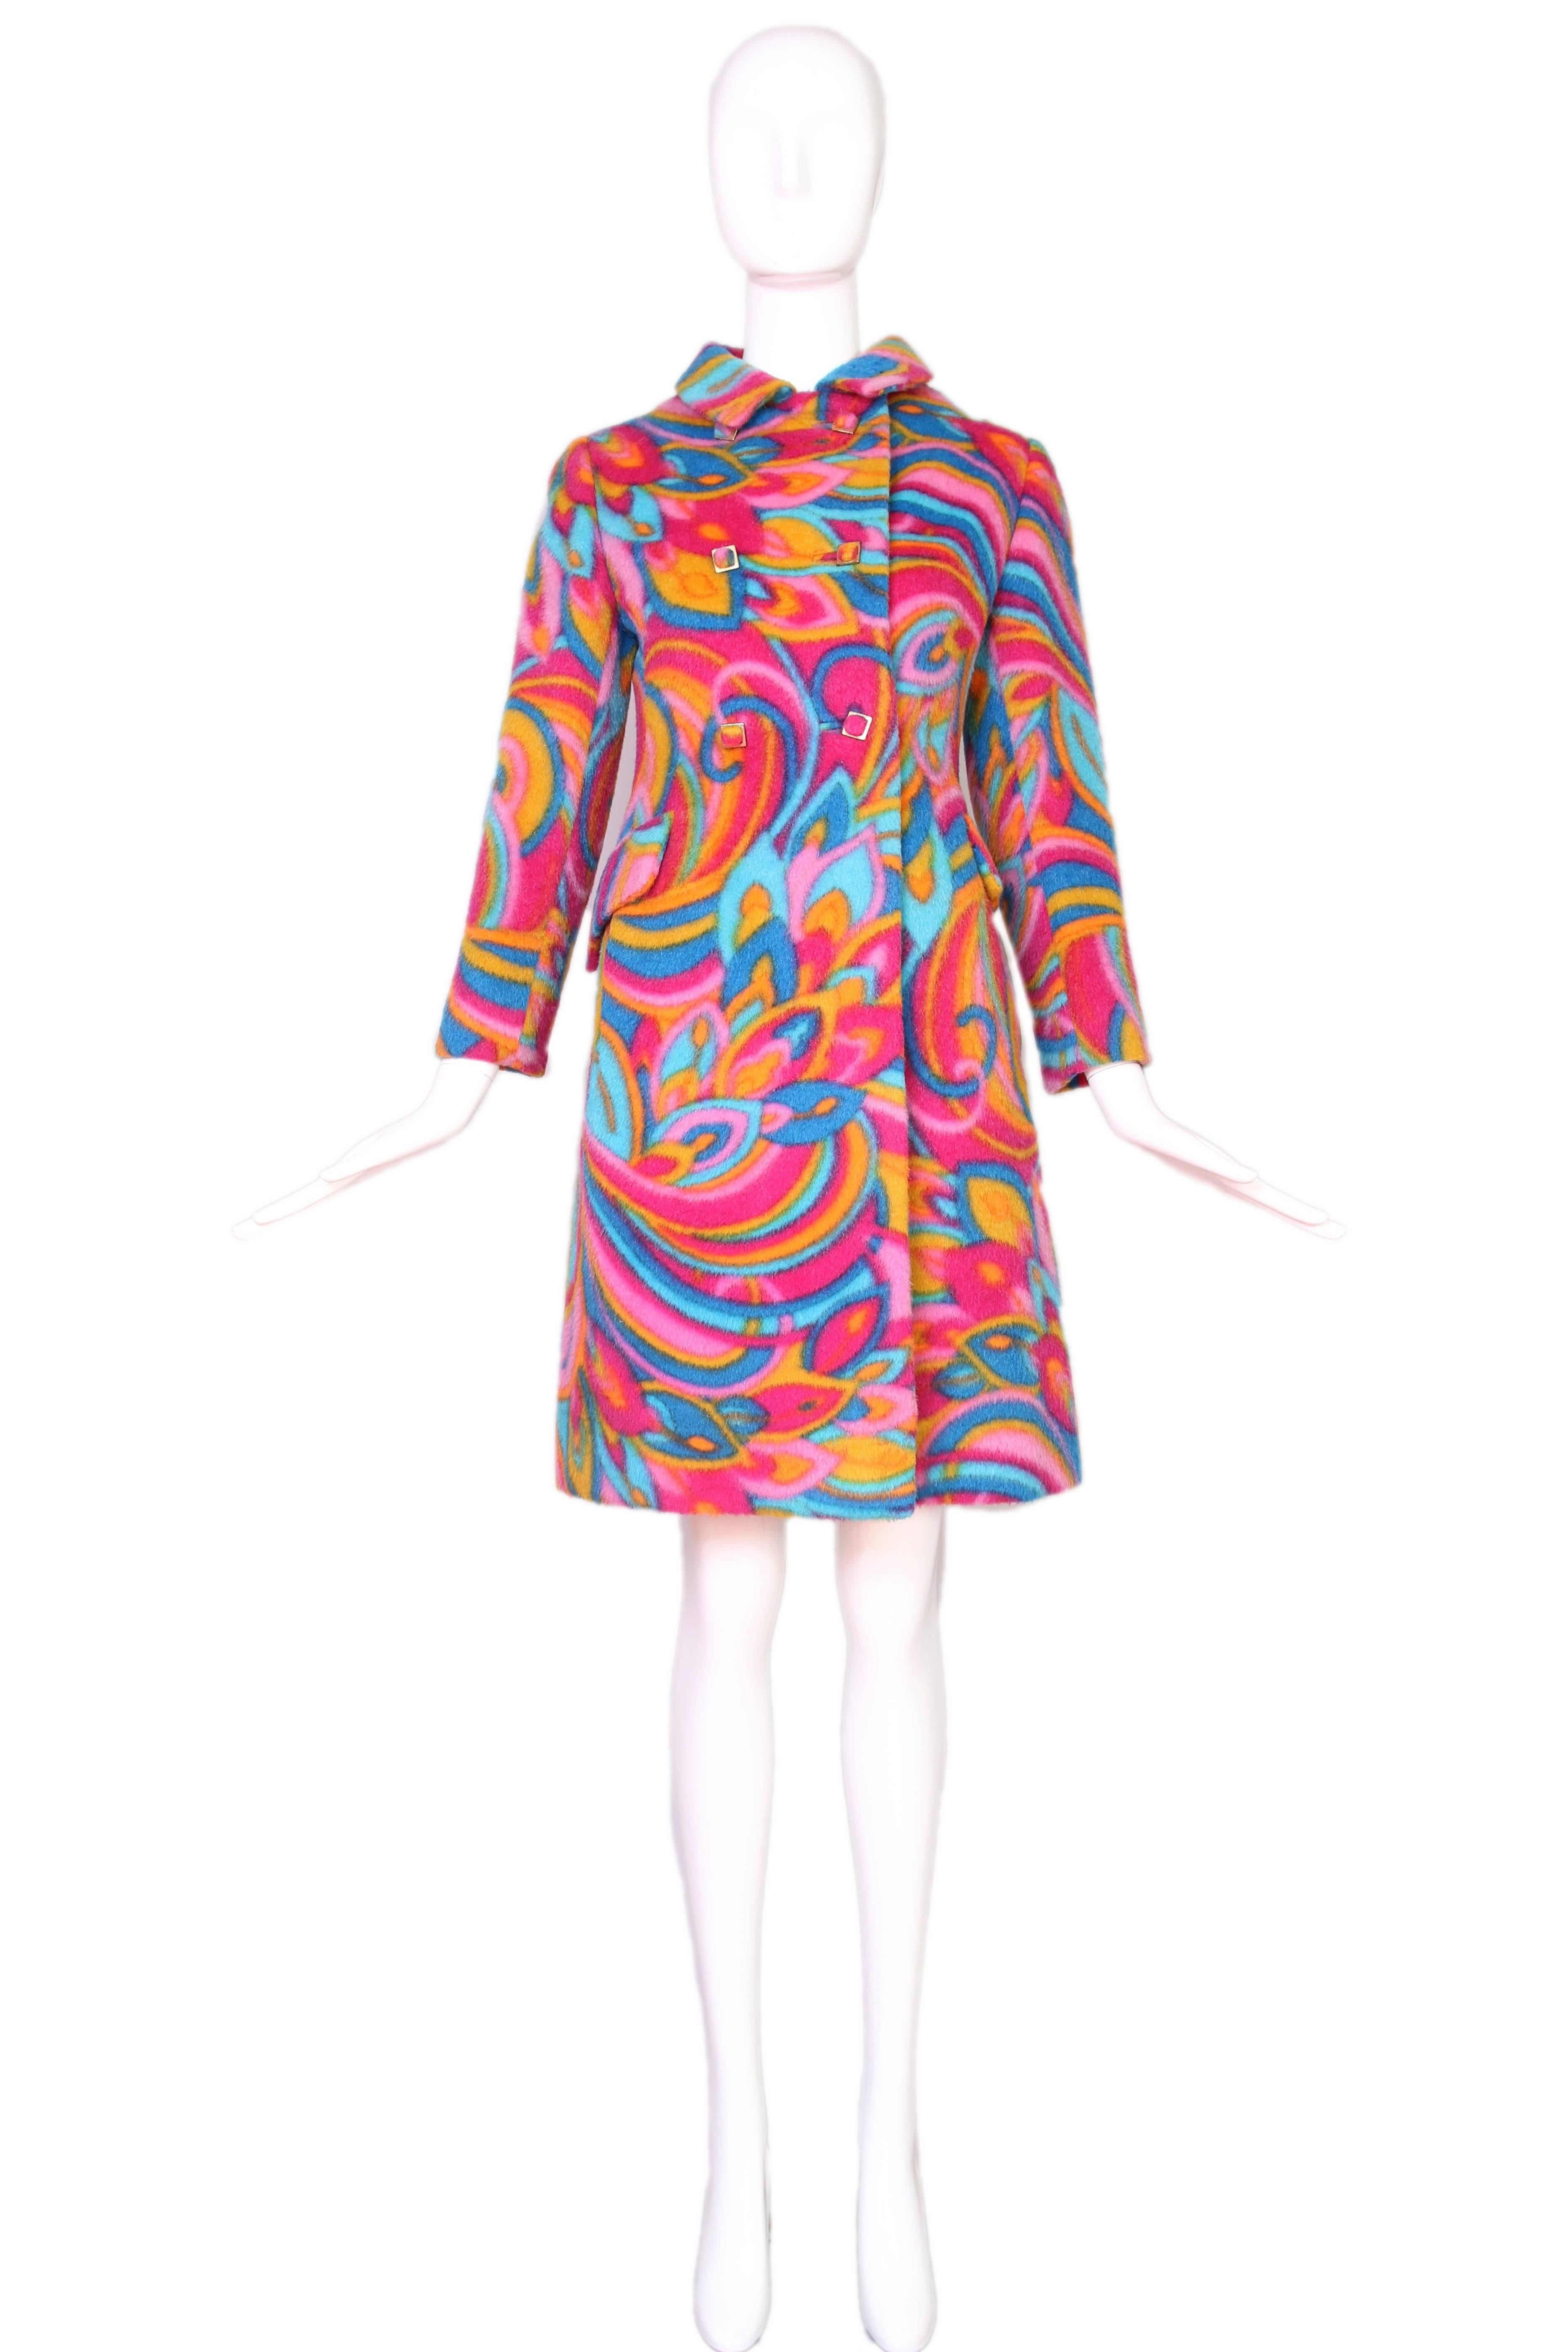 1960's Bill Blass for Maurice Rentner psychedelic wool coat with matching square buttons. In excellent condition with some wear to the collar that looks like it could be part of the fabric print. Size 6 but please consult measurements.